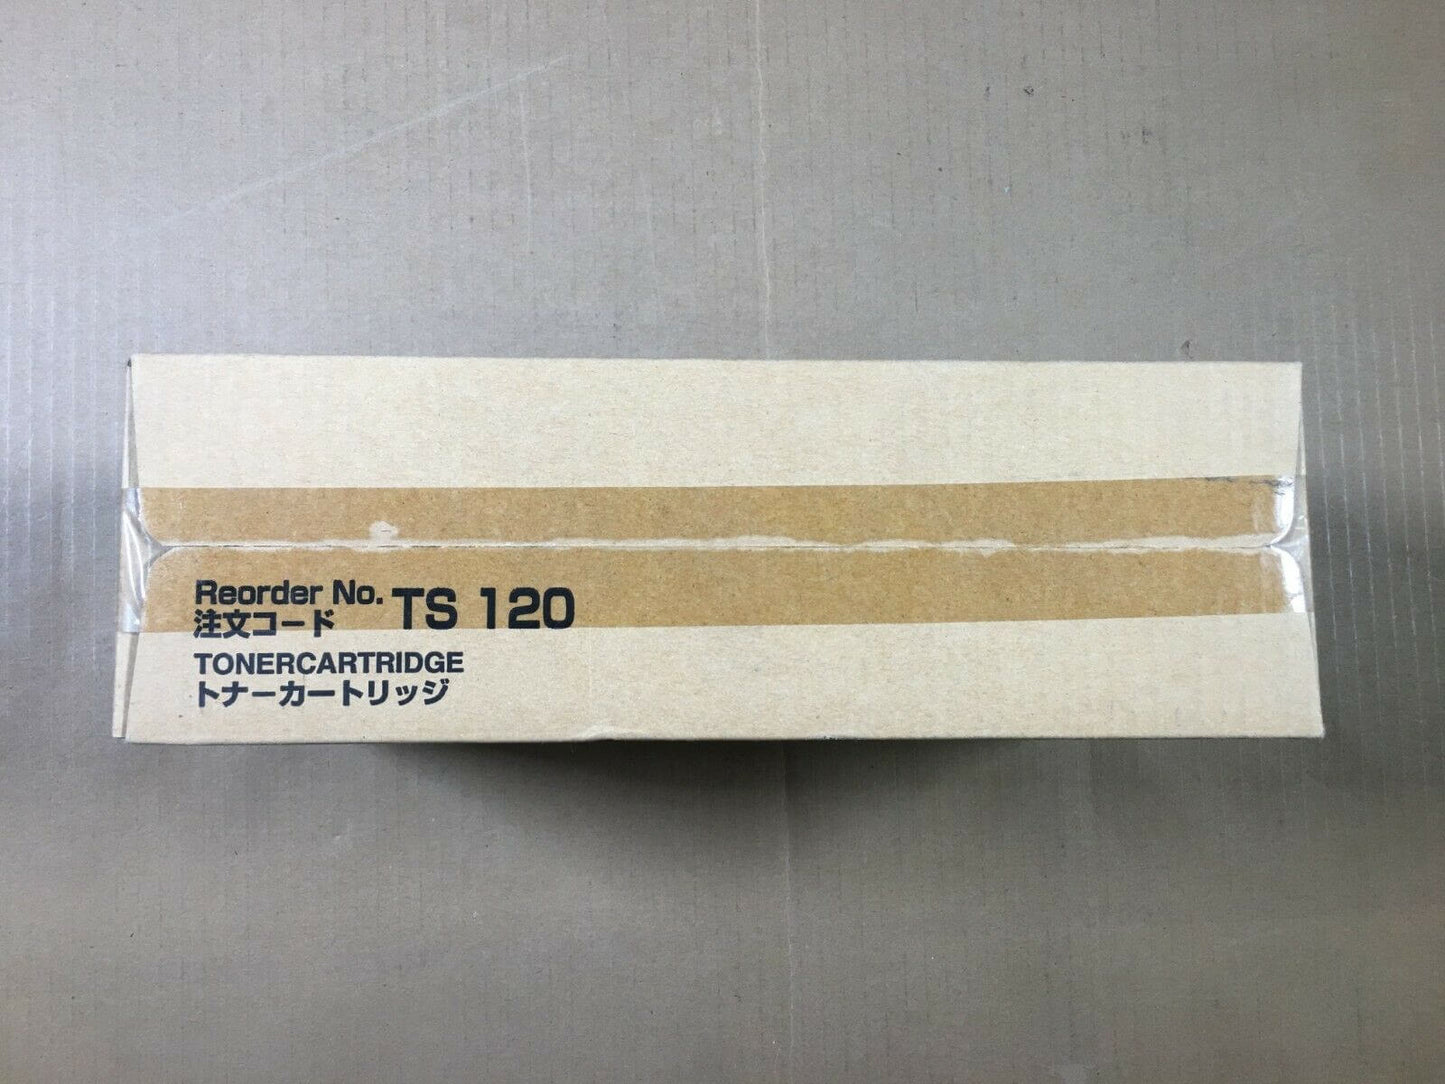 Genuine Muratec TS120 Toner Cartridge Black For F-98-F-100- - Same Day Shipping - copier-clearance-center